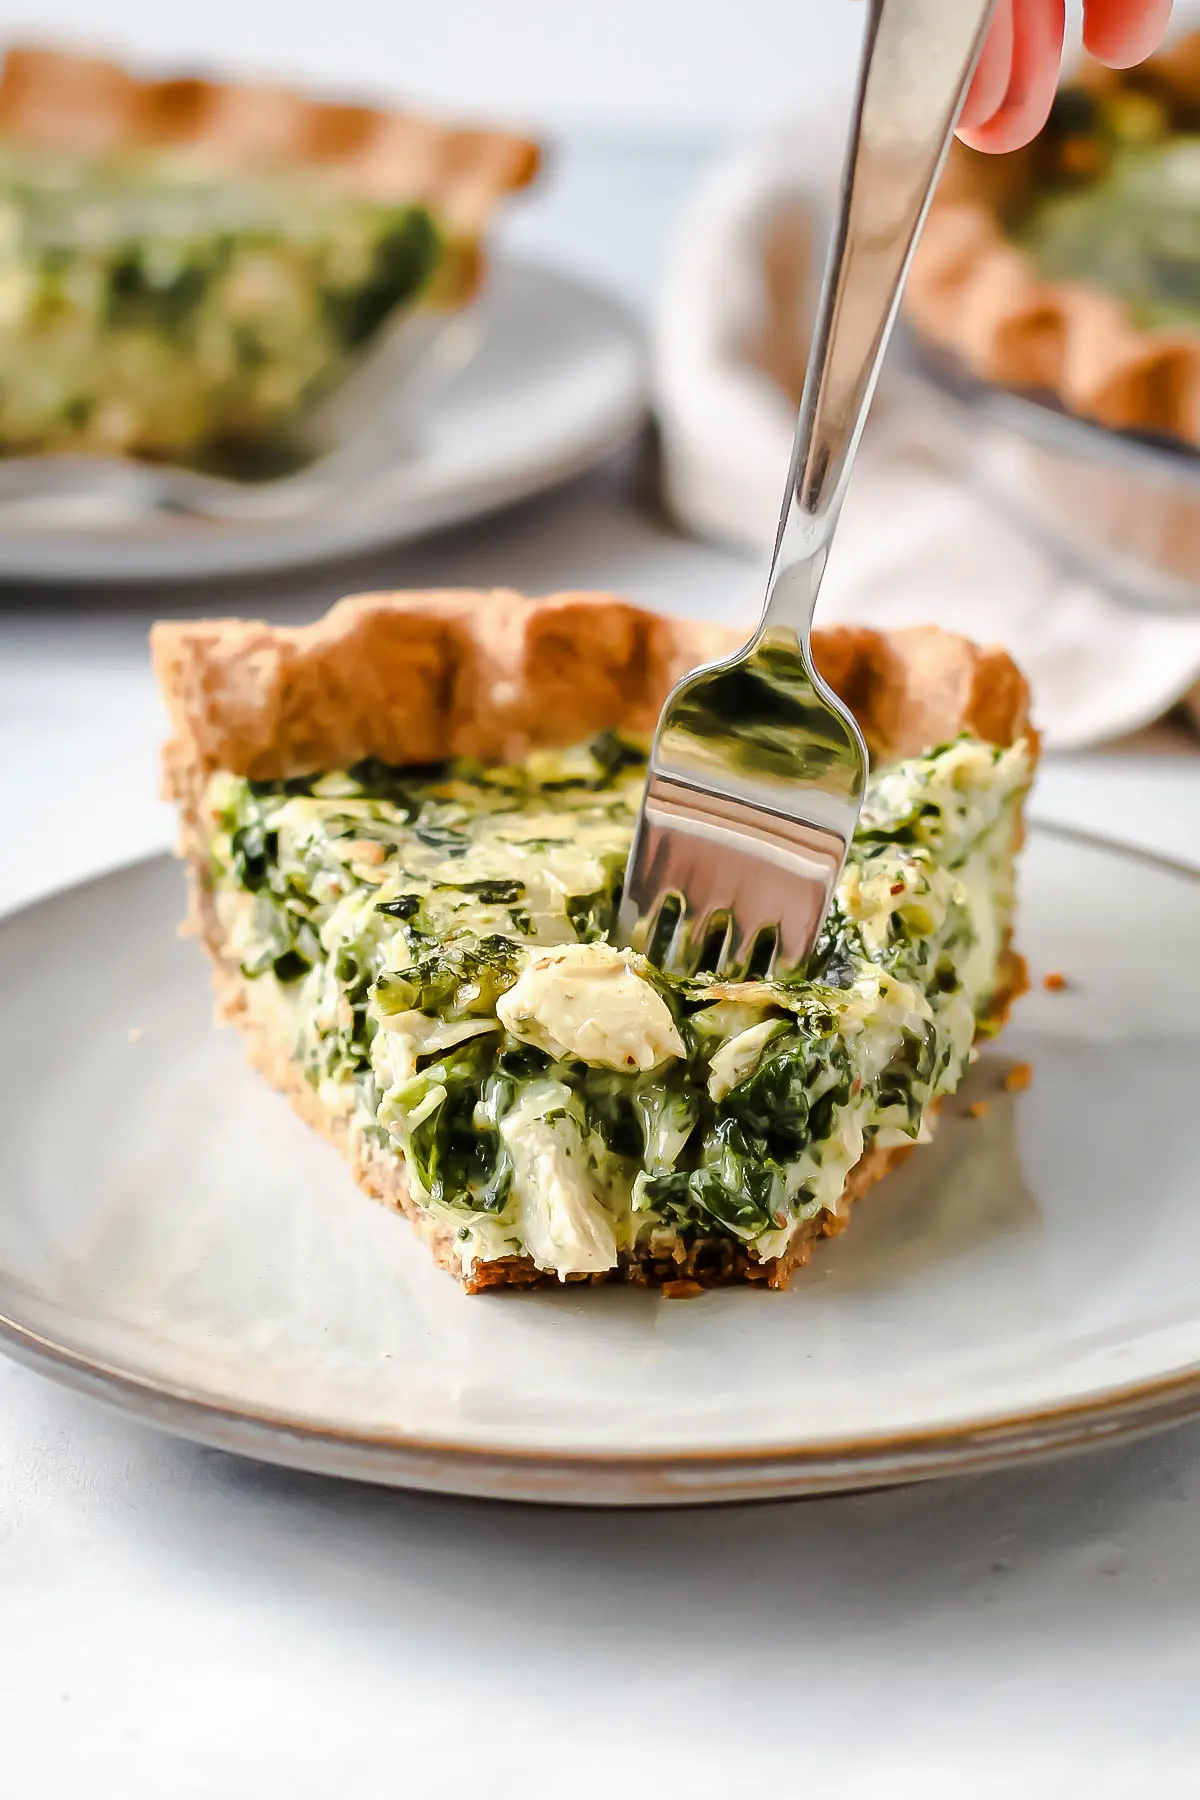 A slice of artichoke pie with a fork taking out a bite.